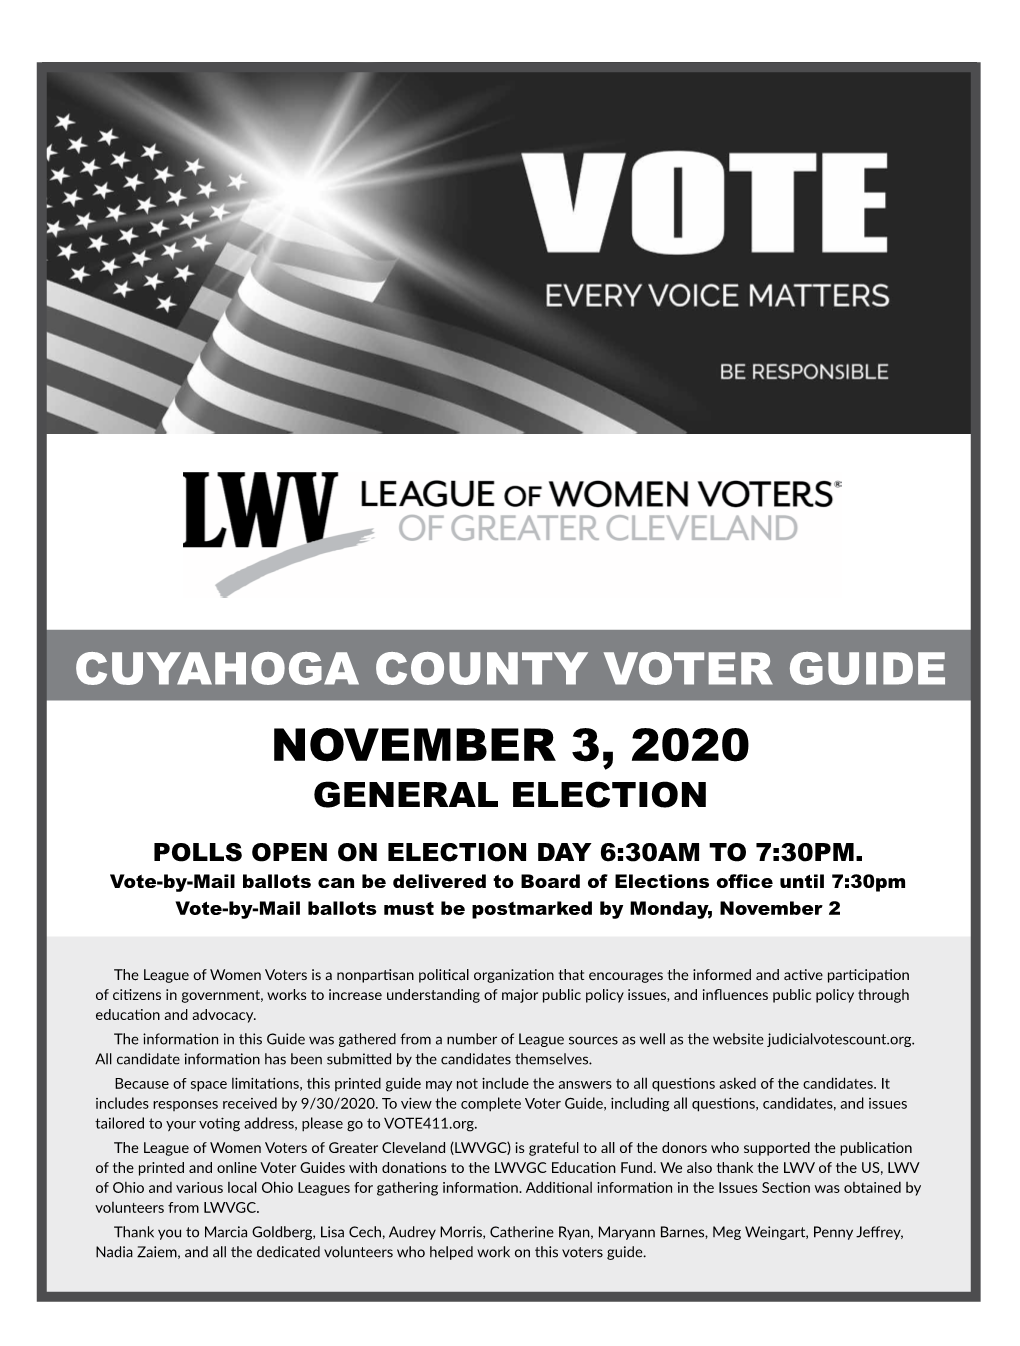 Cuyahoga County Voter Guide November 3, 2020 General Election